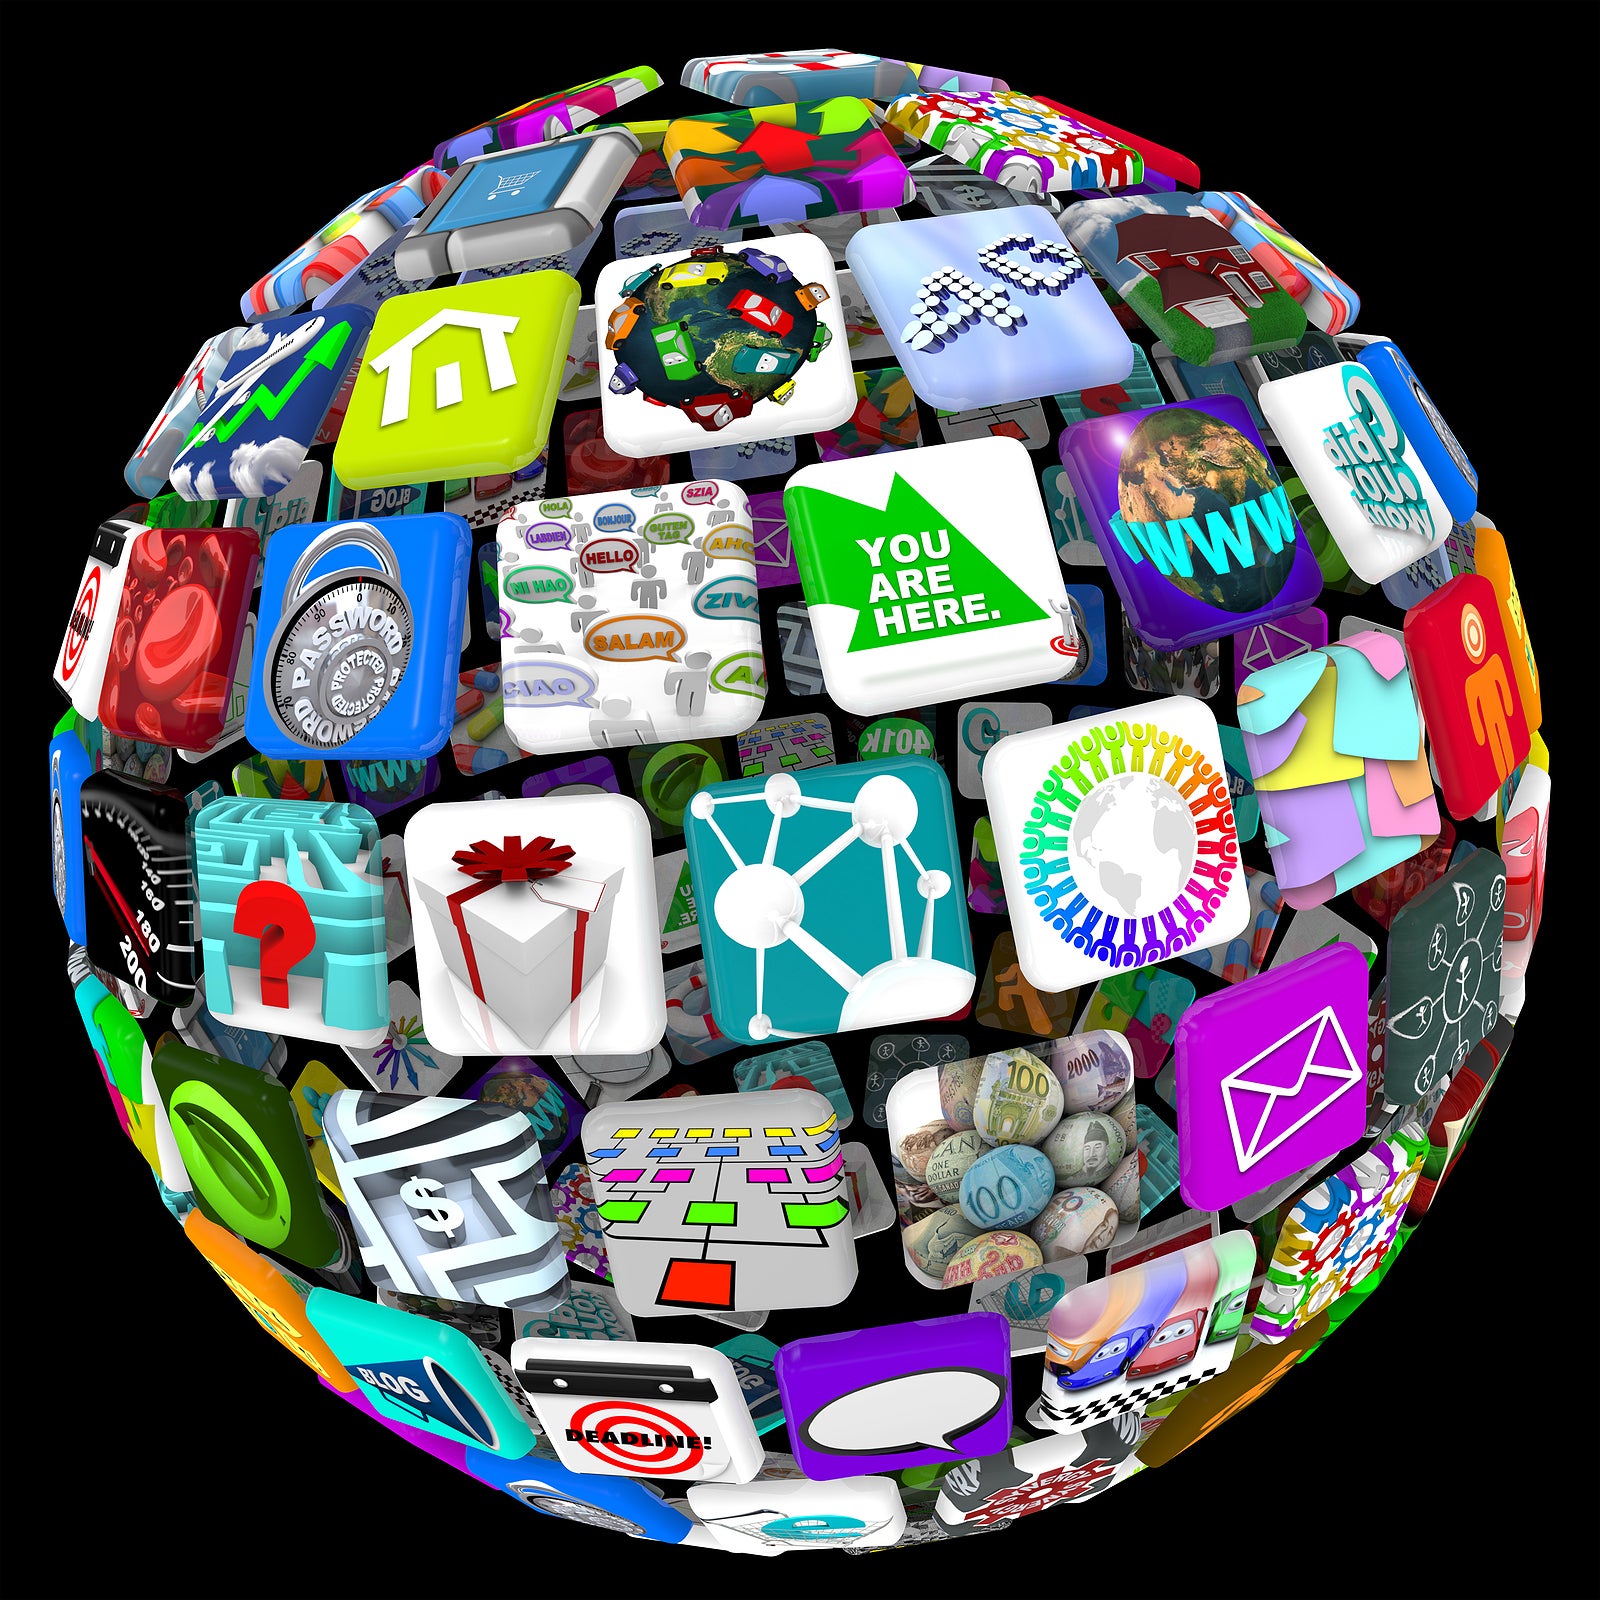 Many application tiles in a spherical pattern representing a world of available apps